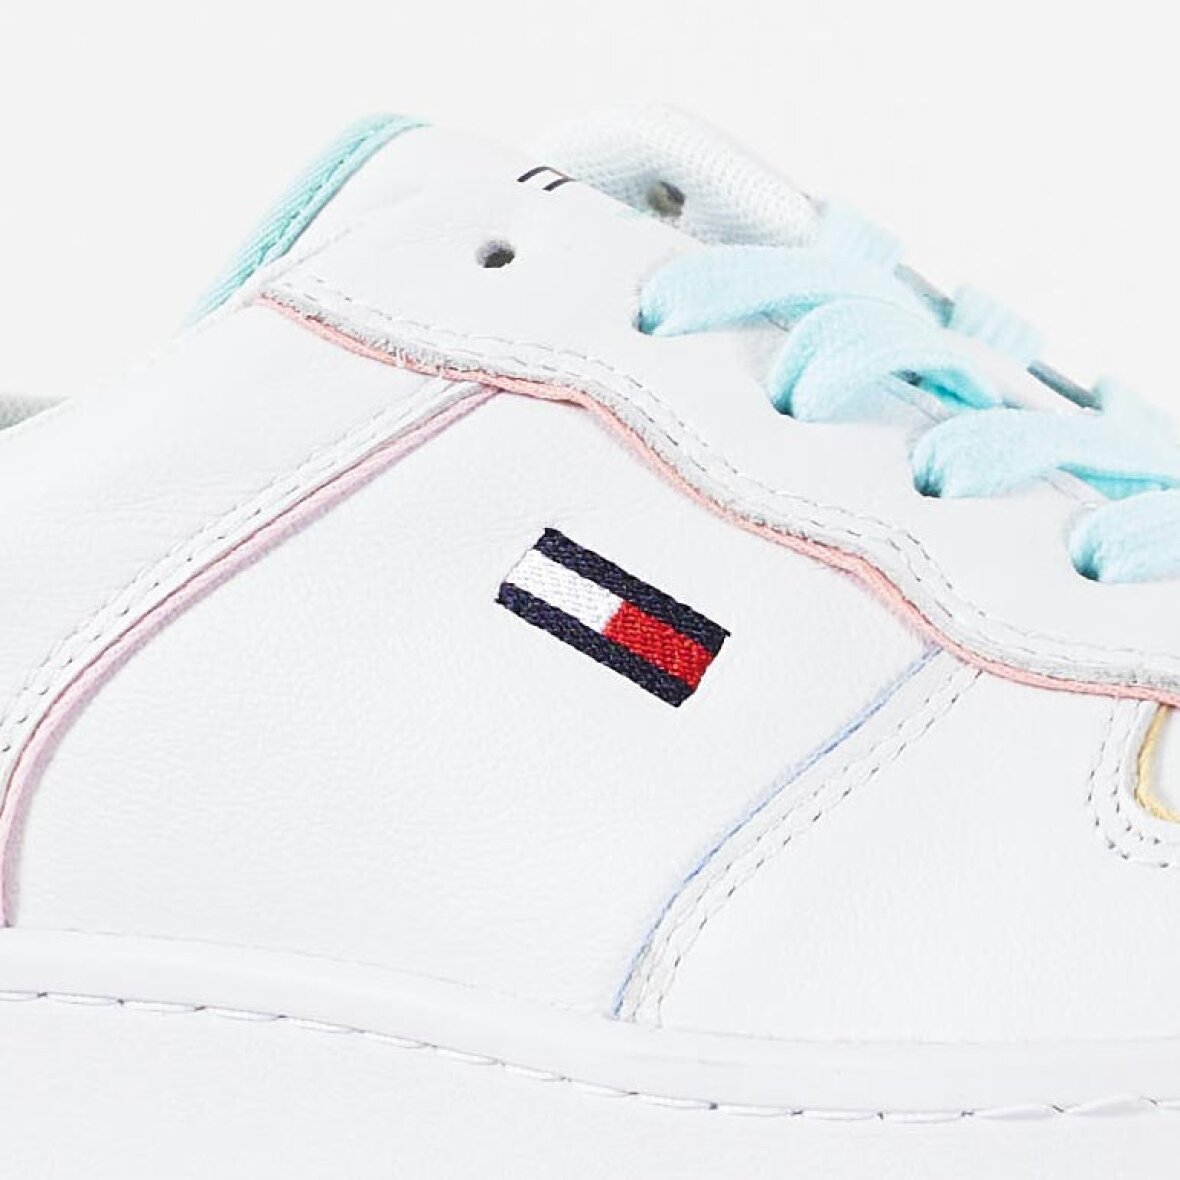 Tommy Hilfiger Shoes - ABO PASTEL PIPING